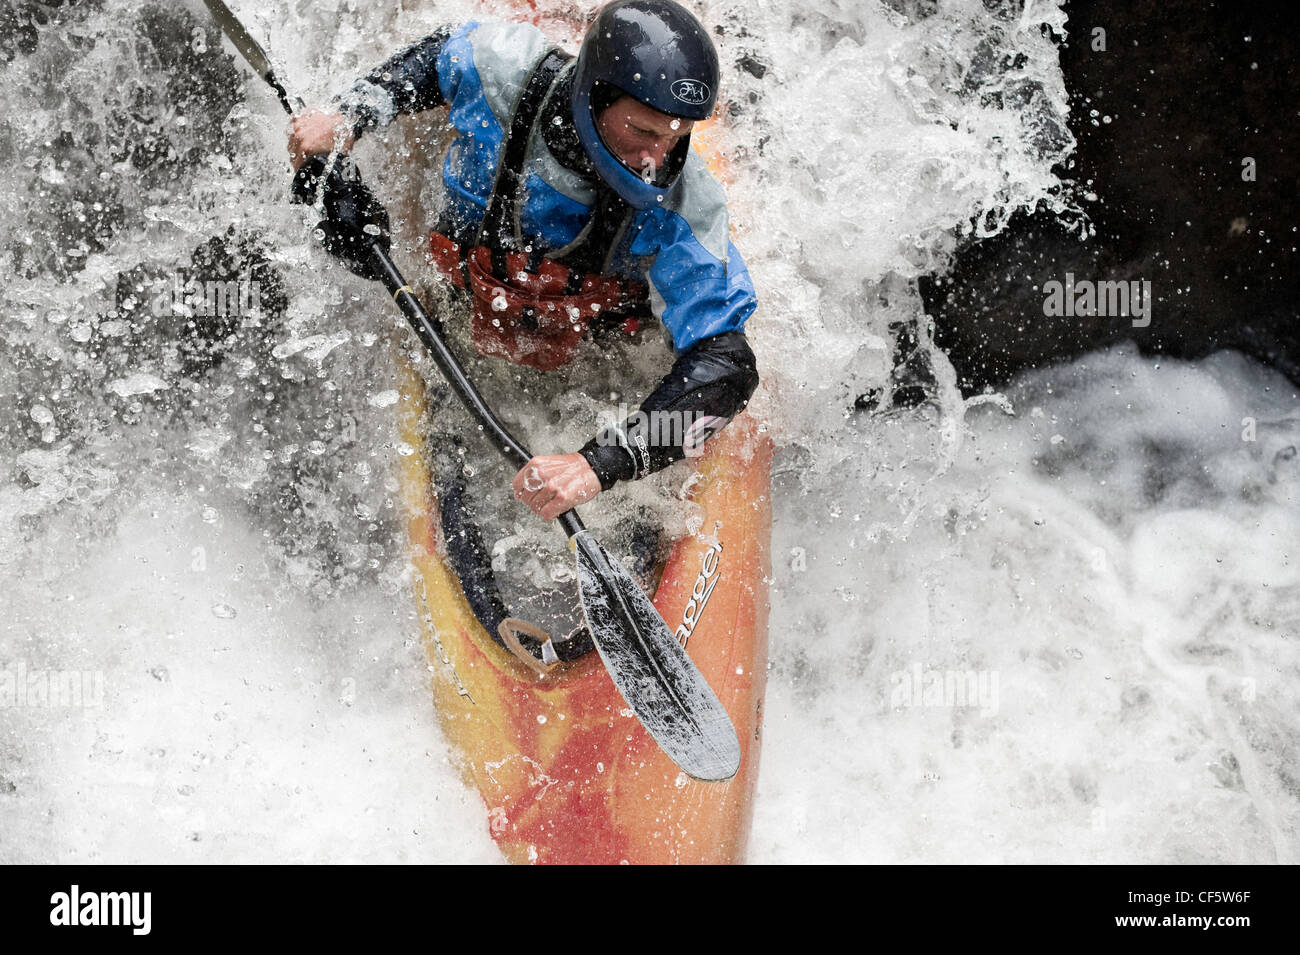 A kayaker drops a waterfall on Homestake Creek outside of Minturn, Colorado.  Technical Class V whitewater. Stock Photo